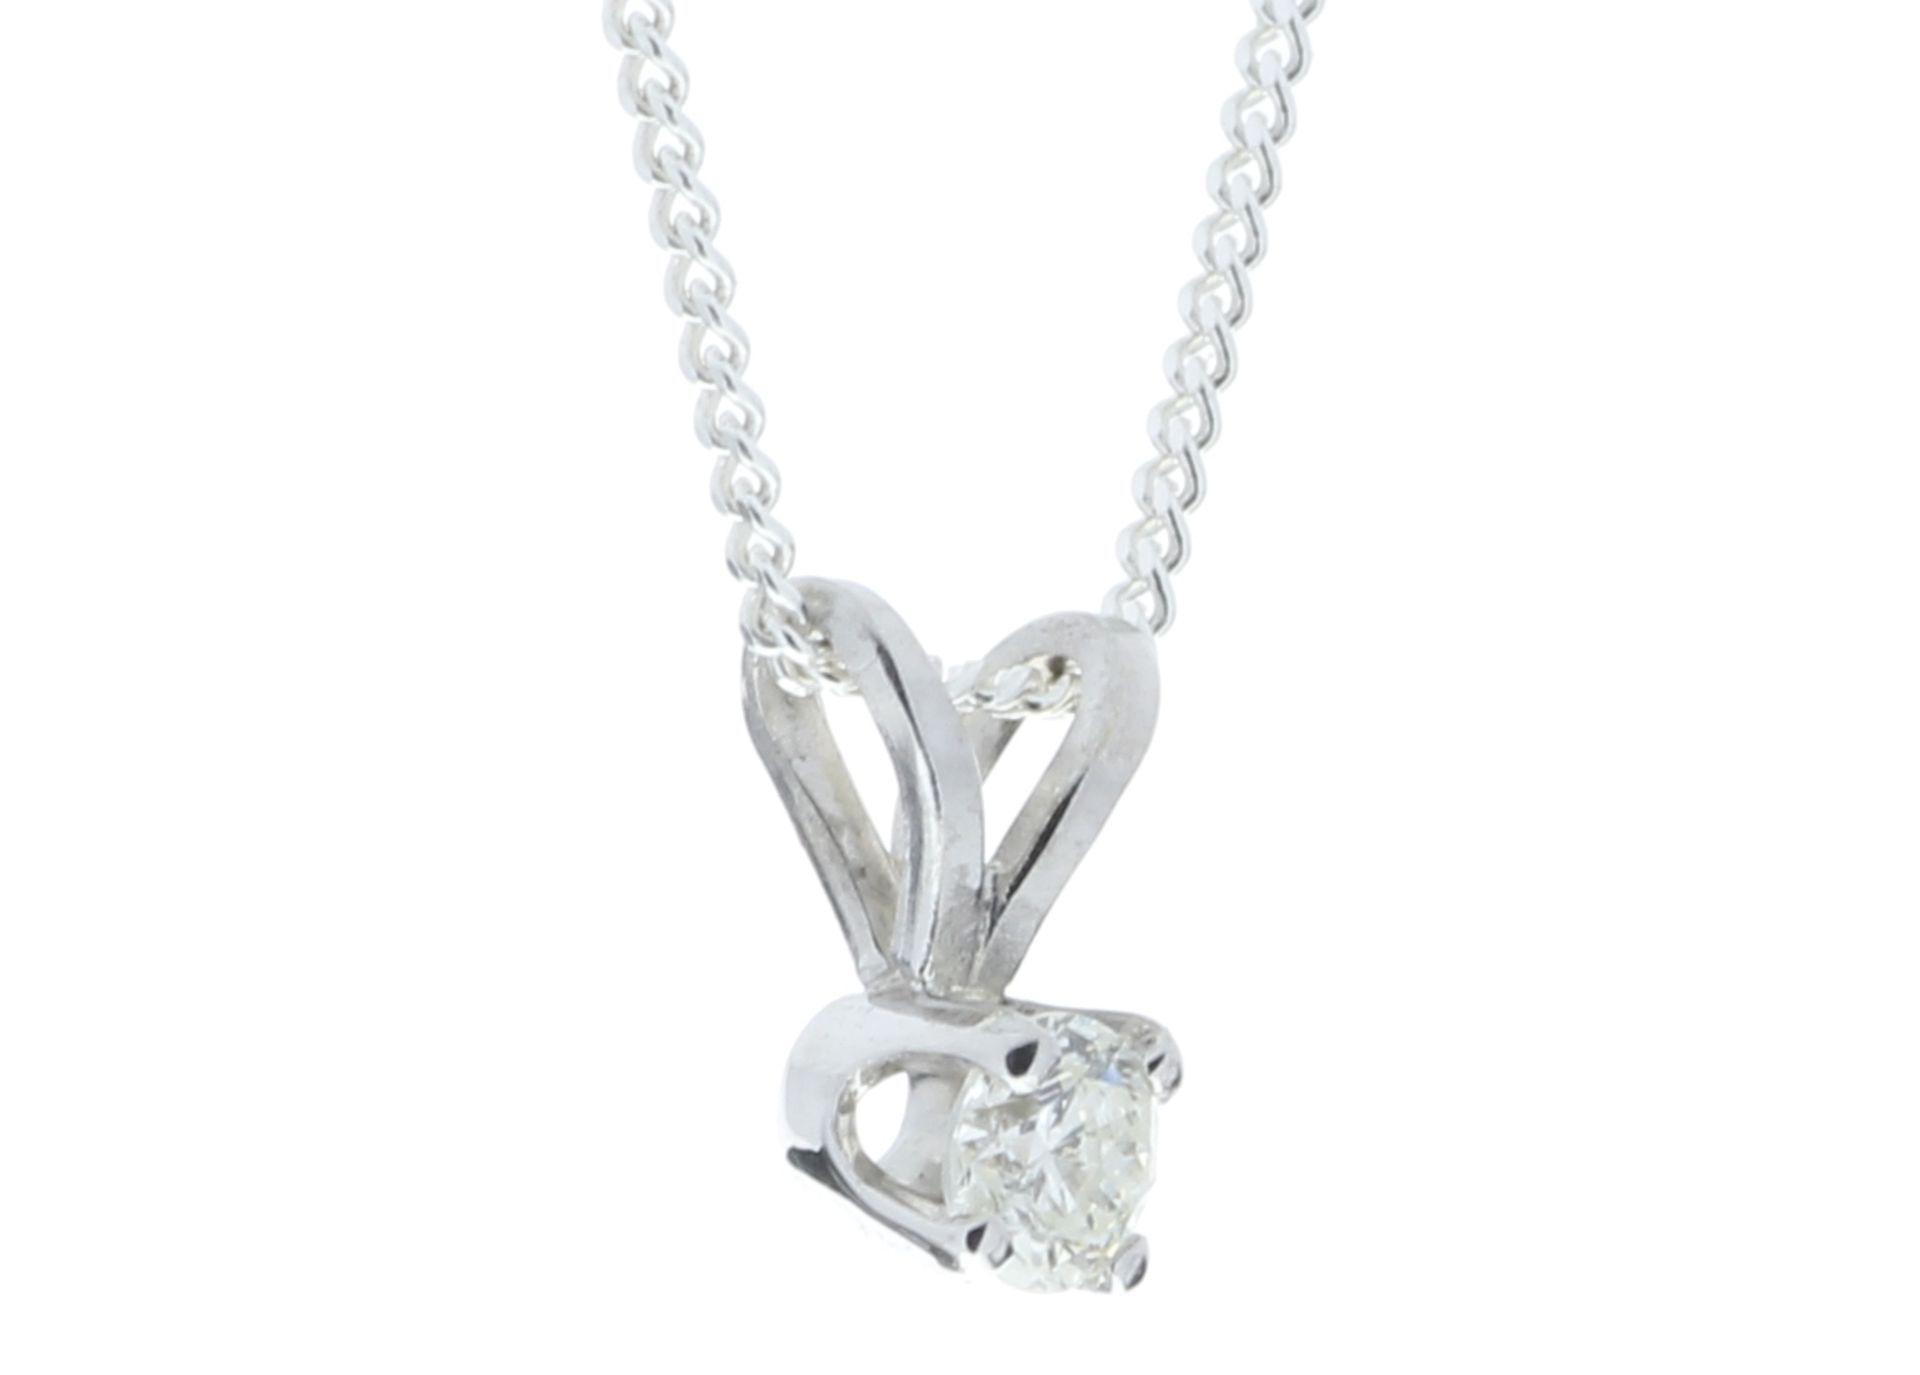 9ct White Gold Single Stone Four Claw Set Diamond Pendant 0.40 Carats - Valued by GIE £5,592.00 - - Image 2 of 5